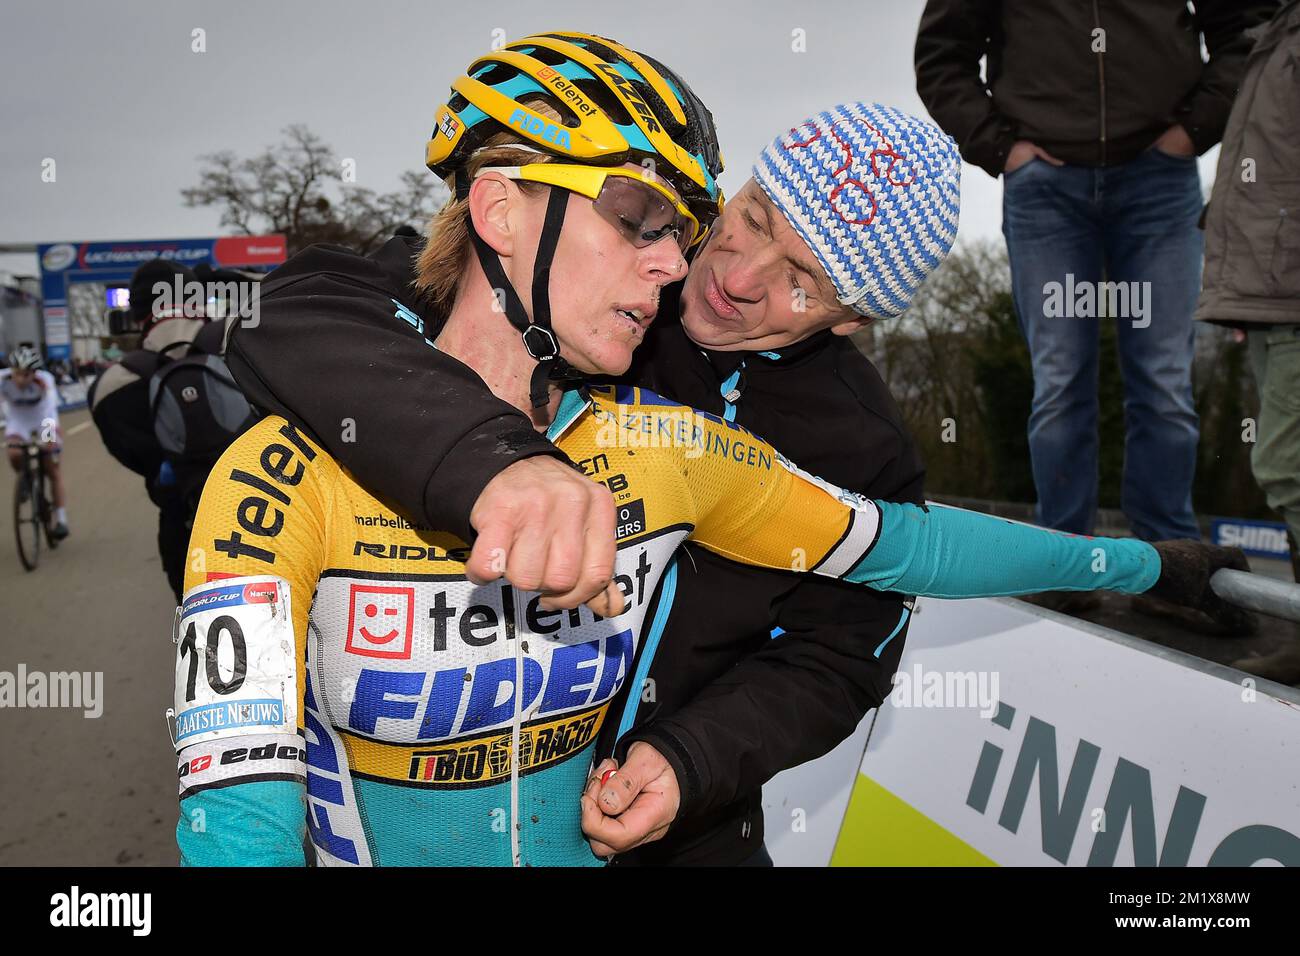 20141221 - NAMUR, BELGIUM: Belgian Ellen Van Loy and Belgian national coach  Rudy De Bie pictured after the cyclocross cycling race in Namur, the fourth  stage in the World Cup cyclocross, Sunday